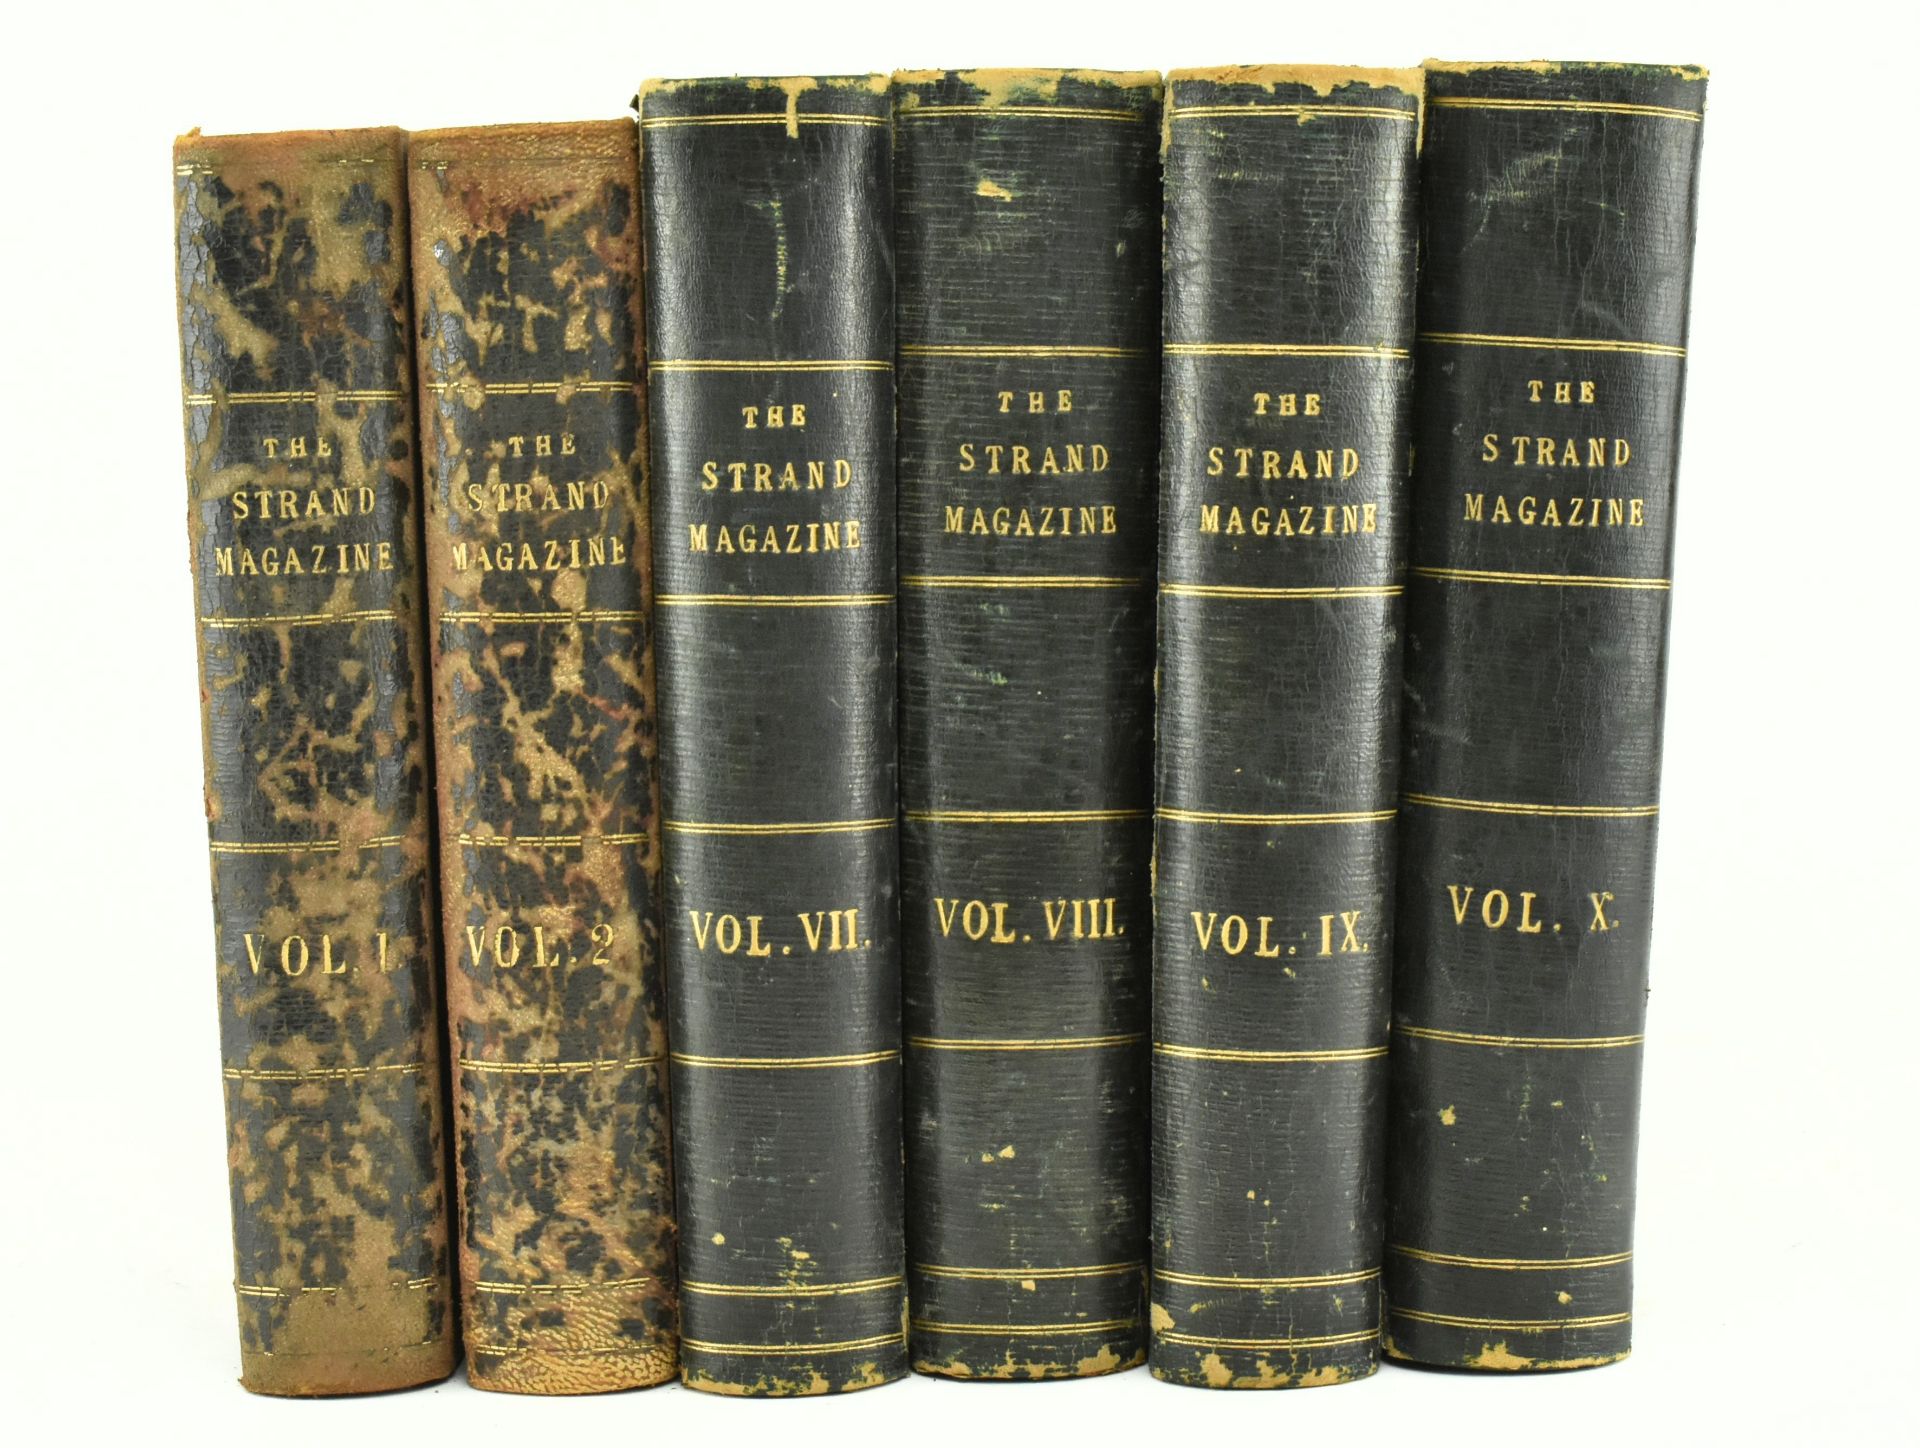 1891-1895 SIX VOLUMES OF THE STRAND MAGAZINE BOUND IN LEATHER